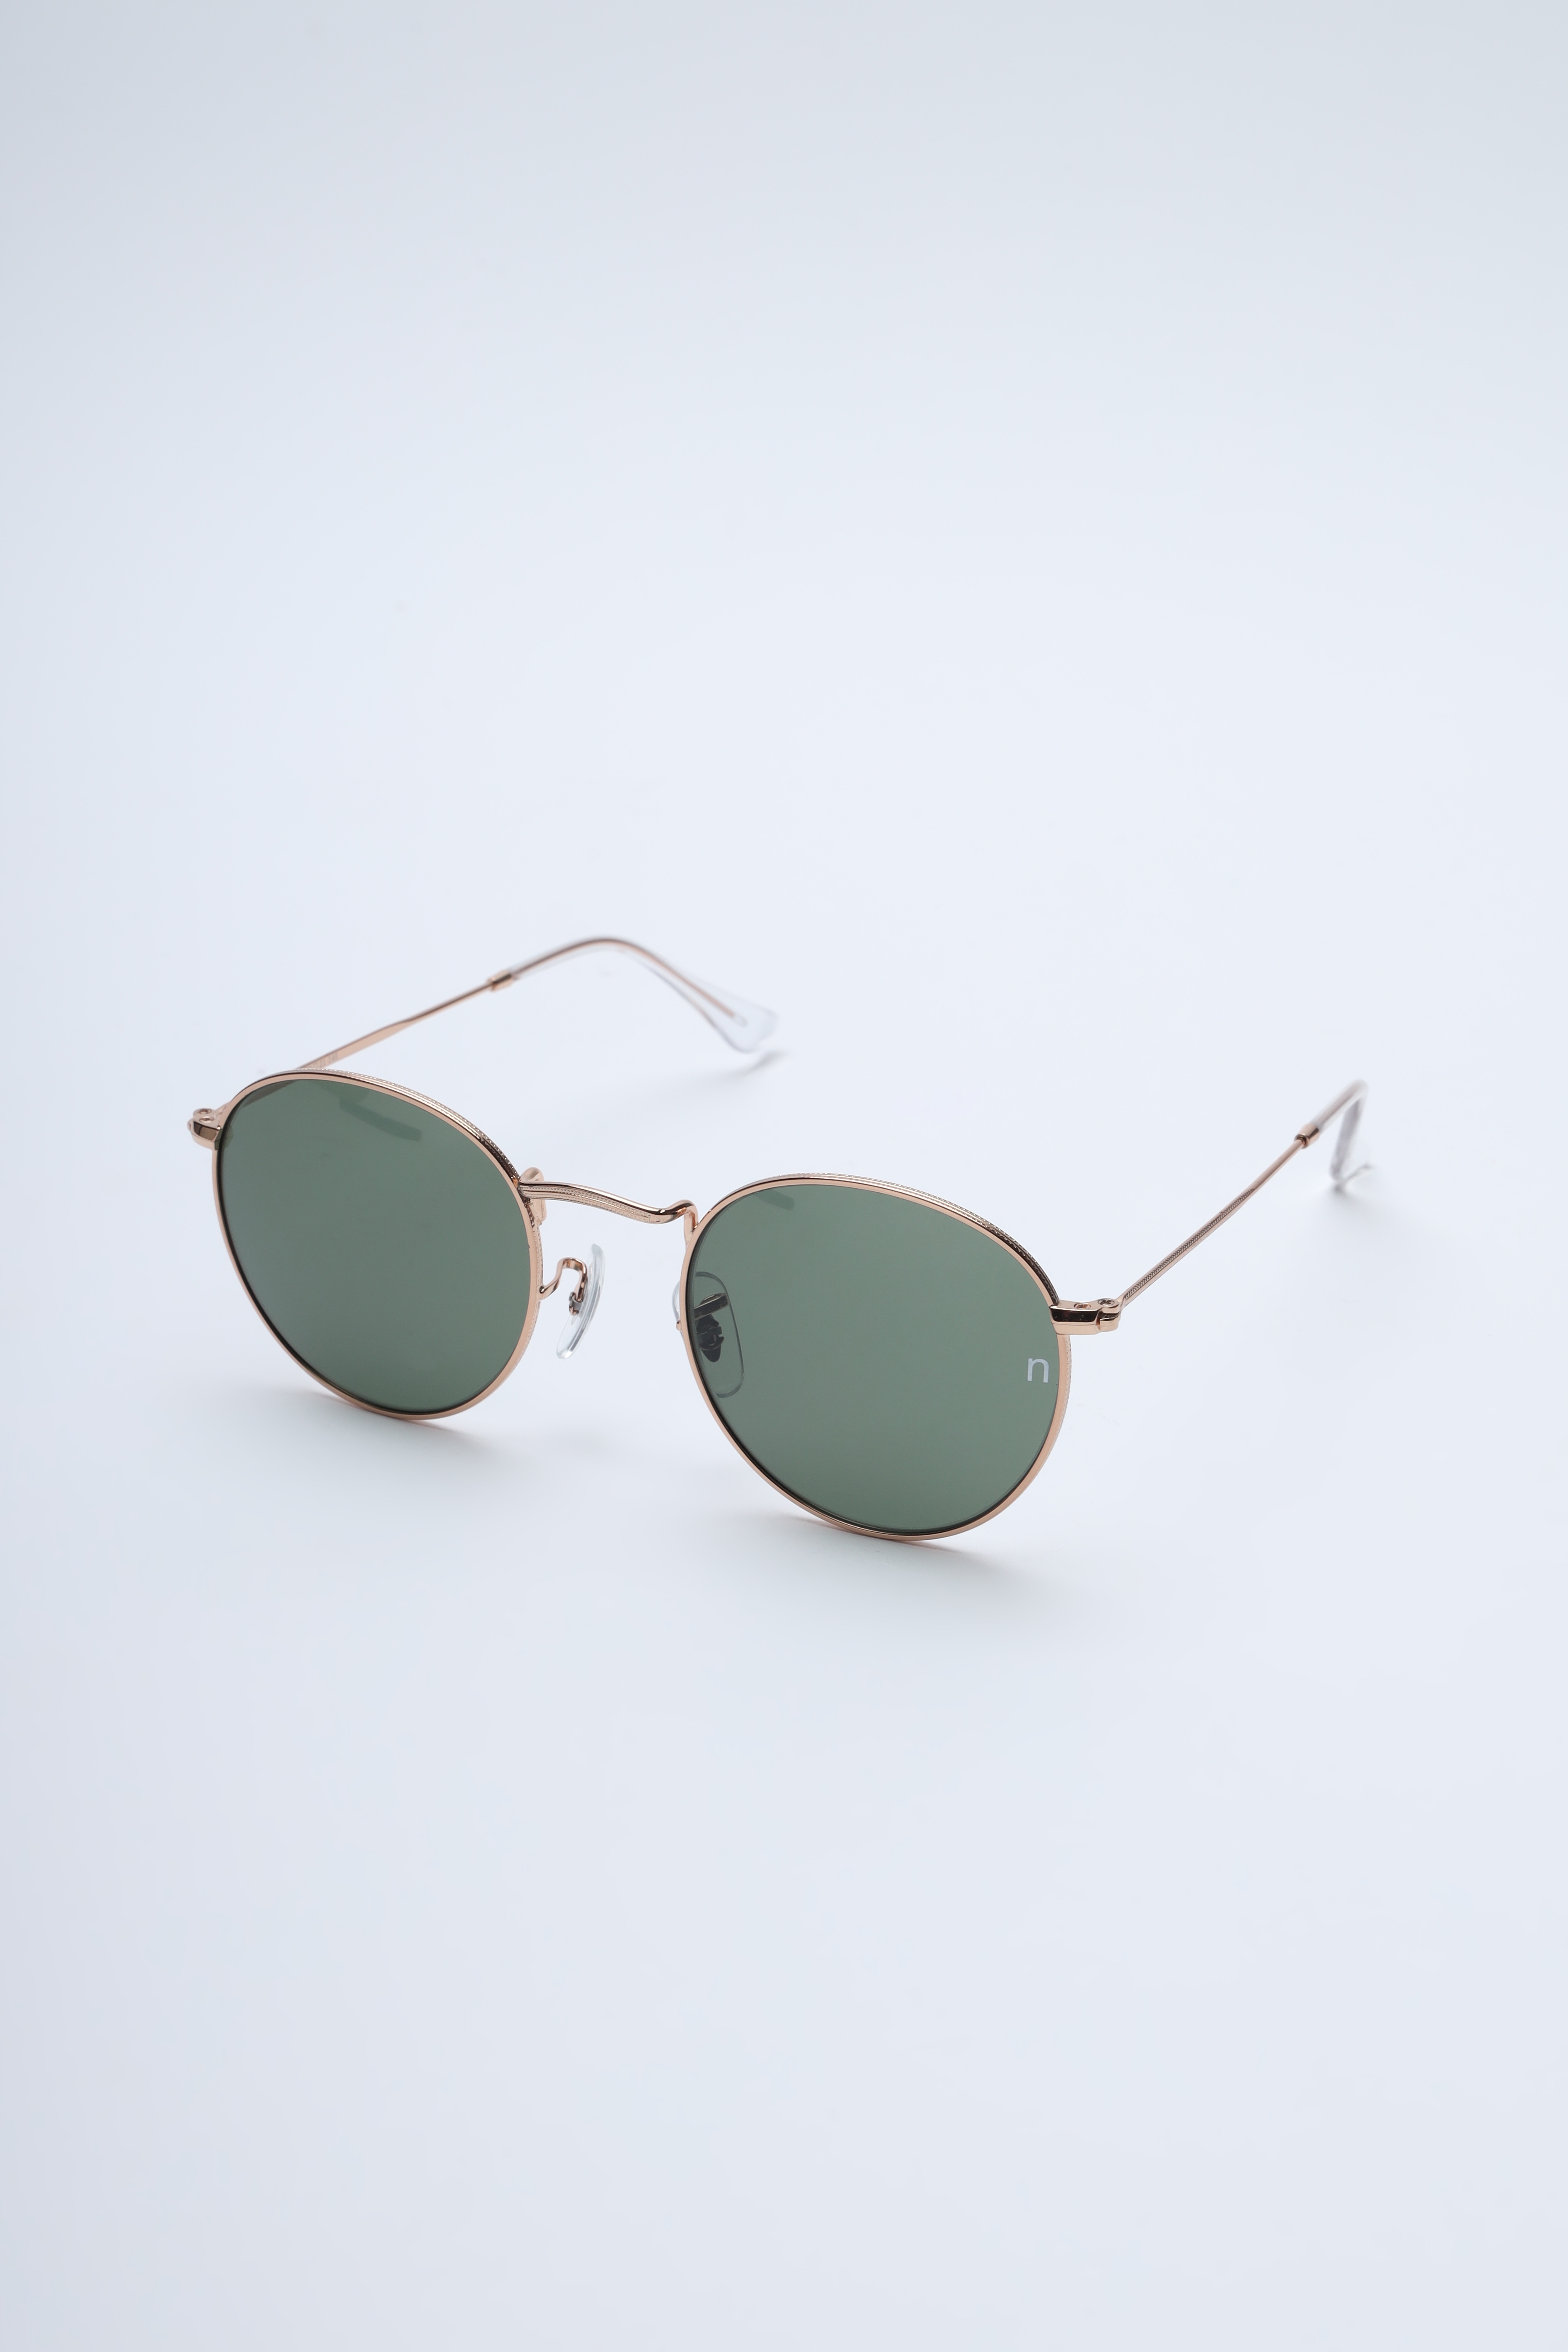 Noggah | Noggah Stainless Steel Gold Frame with Green Glass UV Protection Lens  Medium Size Unisex Sunglasses